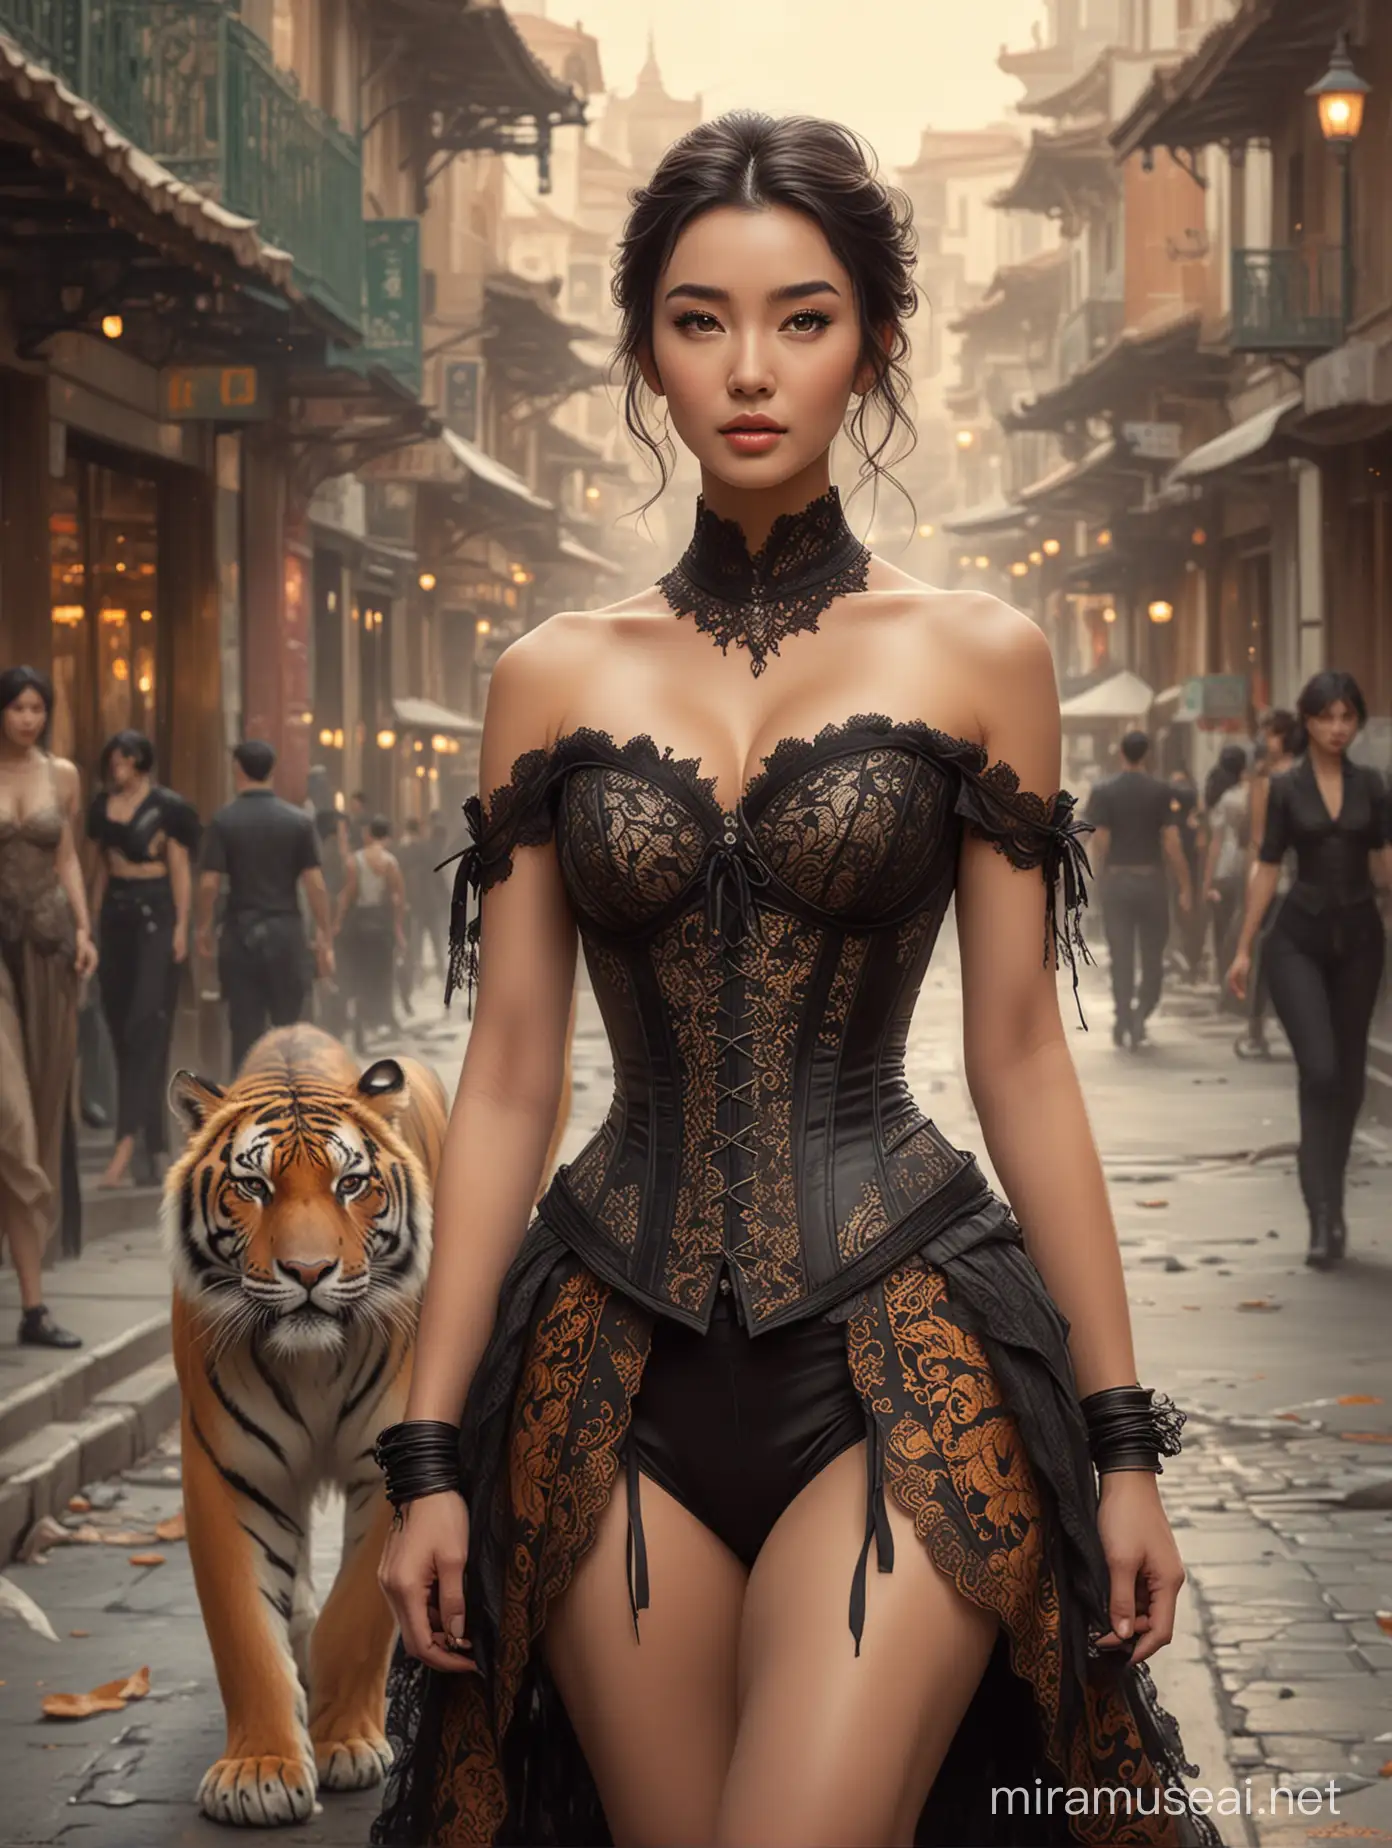 create how you see most beautiful Li Bingbing wearing lace corset walking with tiger on busy street  influenced by the artistic styles of Charlie Bowater, Frank Frazetta, Karol Bak, and WLOP, interpreted as a color pencil sketch boasting touches akin to manuscript illumination, surrounded by a cinematic atmosphere achieved through an ultra-wide angle perspective, bathed in warm colors and tempered by low contrast, producing a 5D visual quality